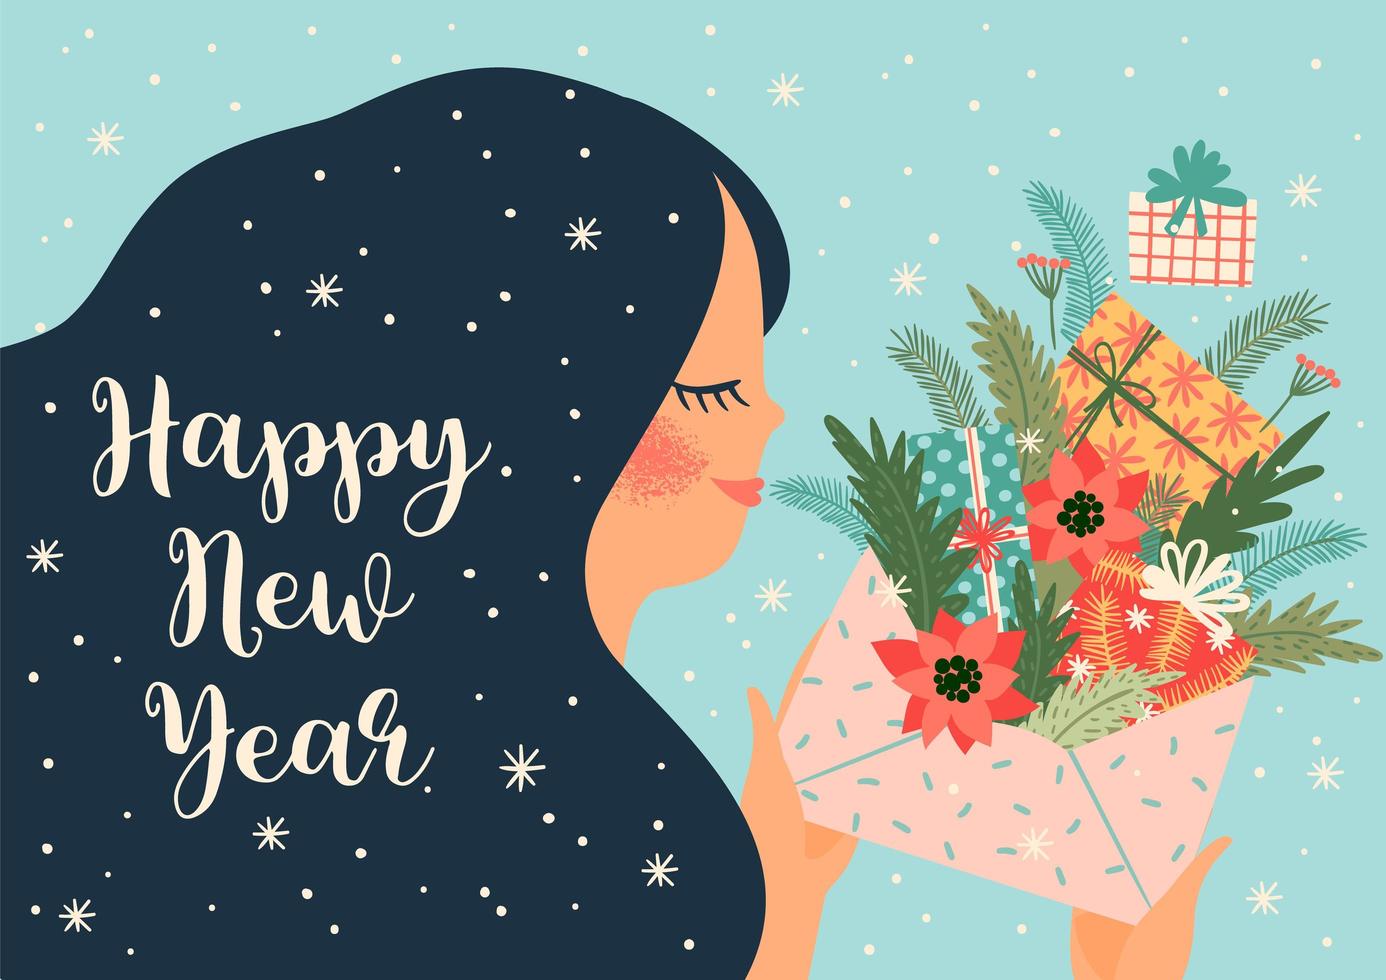 Christmas and New Year's greeting card design vector